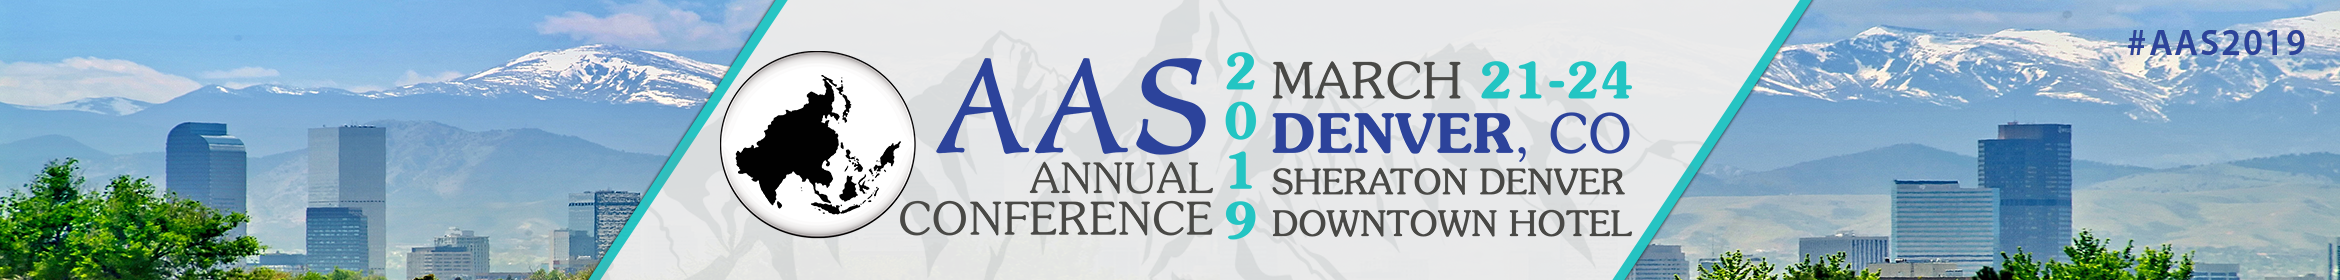 2019 AAS Annual Conference-Denver Main banner